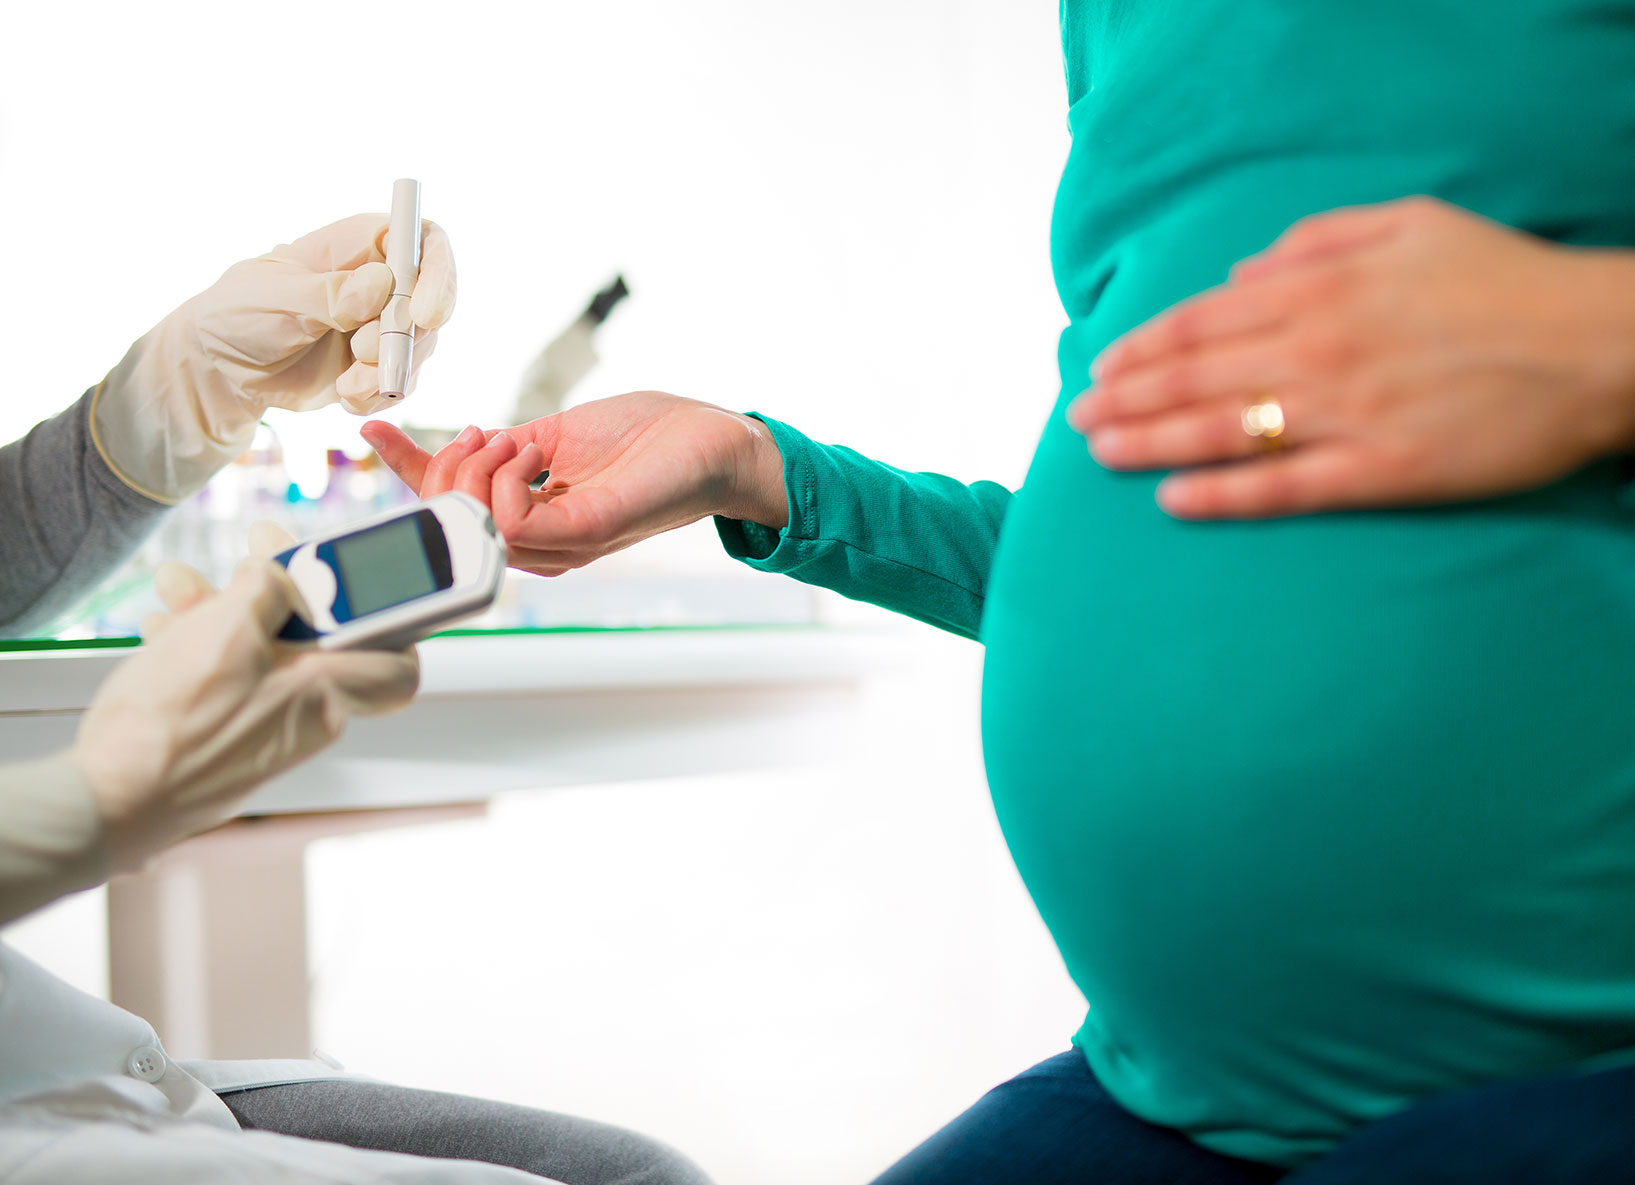 Obesity reduces chances of conception